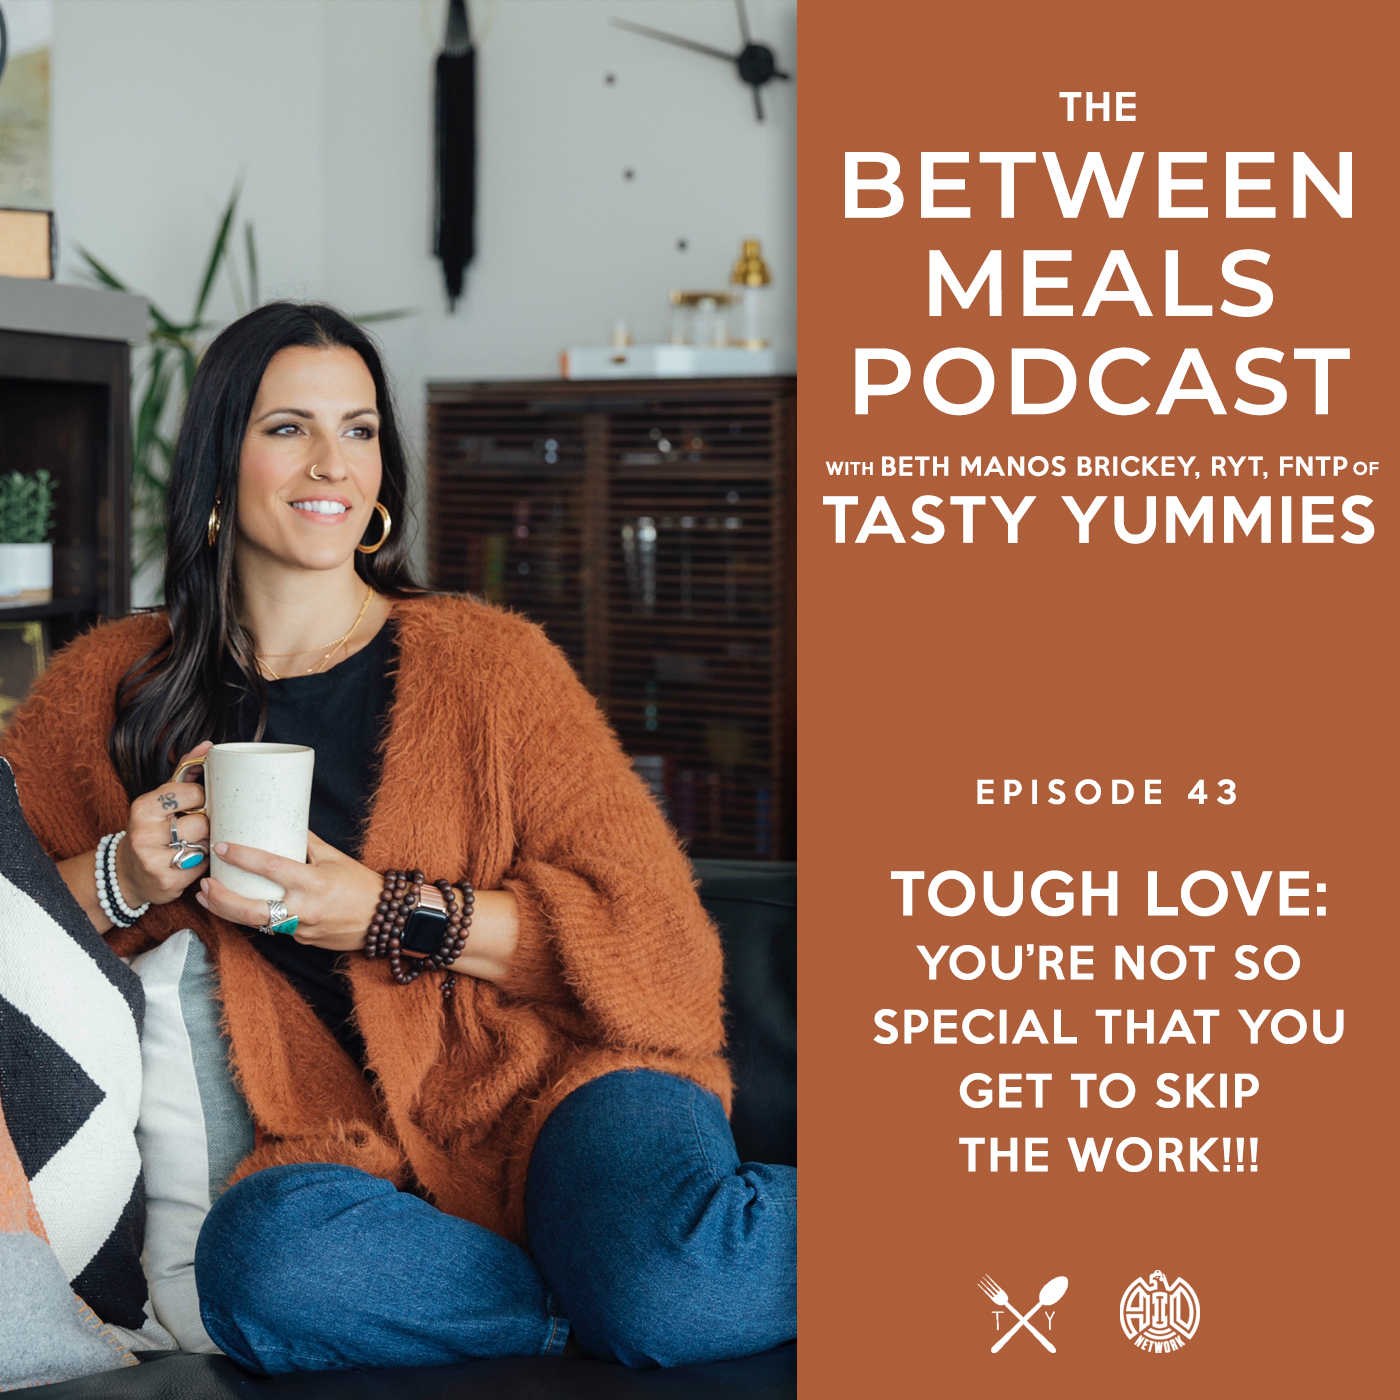 Between Meals Podcast. Episode 43: TOUGH LOVE: You?re Not So Special That You Get to Skip the Work!!!